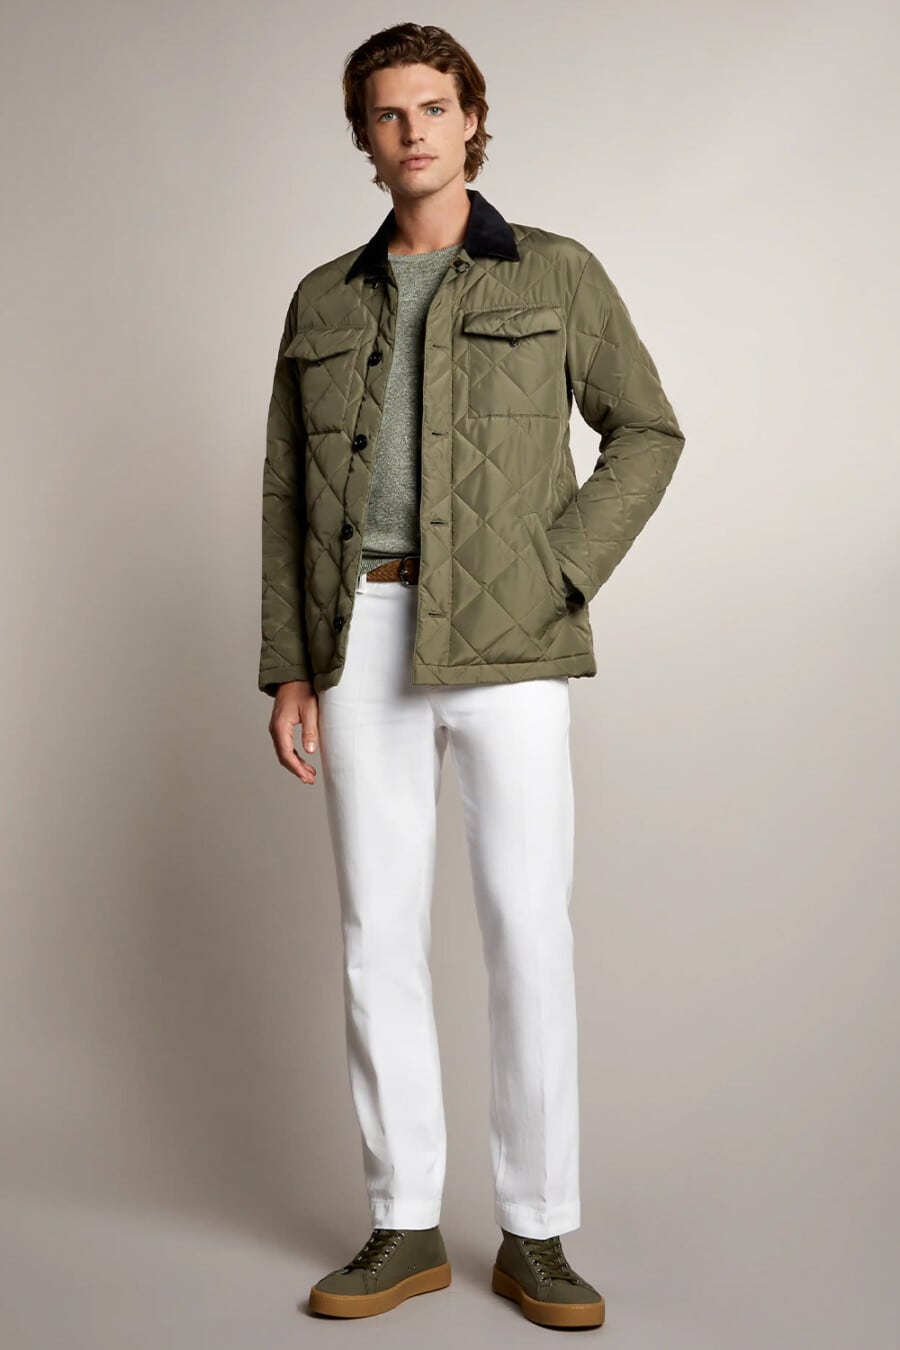 Men's white jeans, green T-shirt, green quilted jacket and green high-top gum sole sneakers outfit